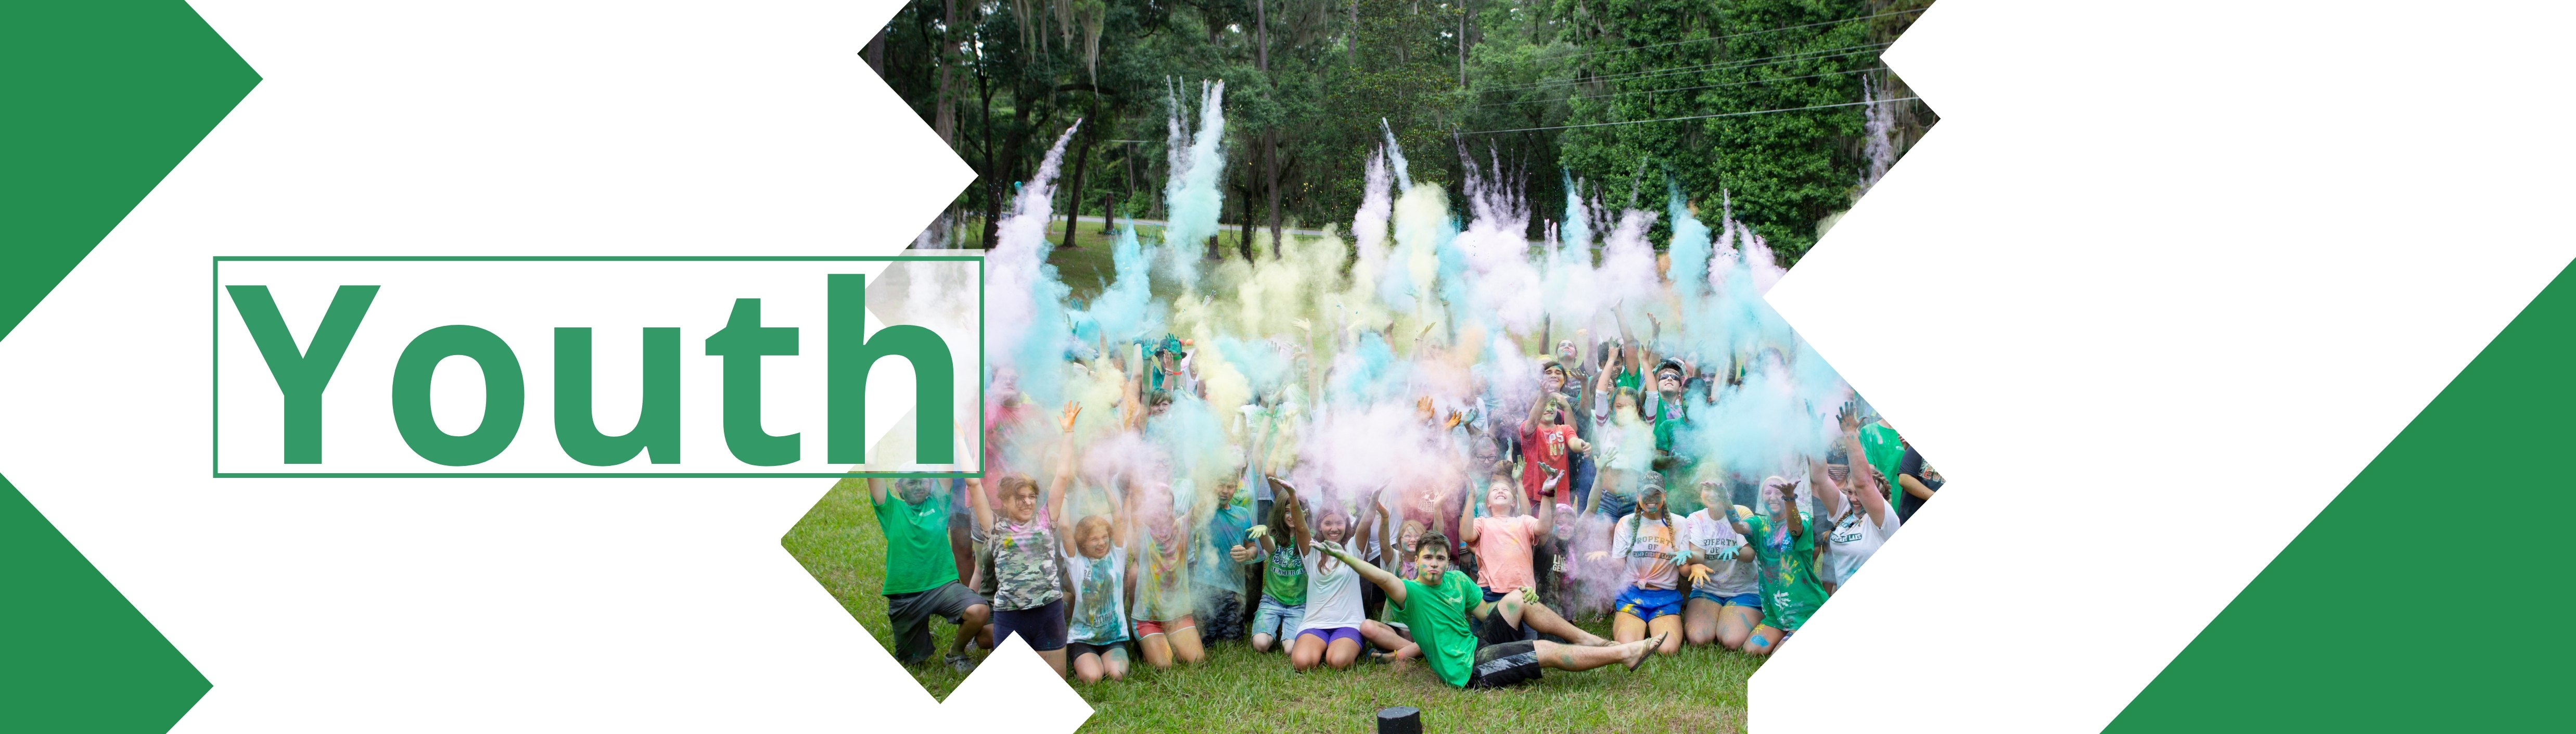 Youth at camp throwing color run powder in the air